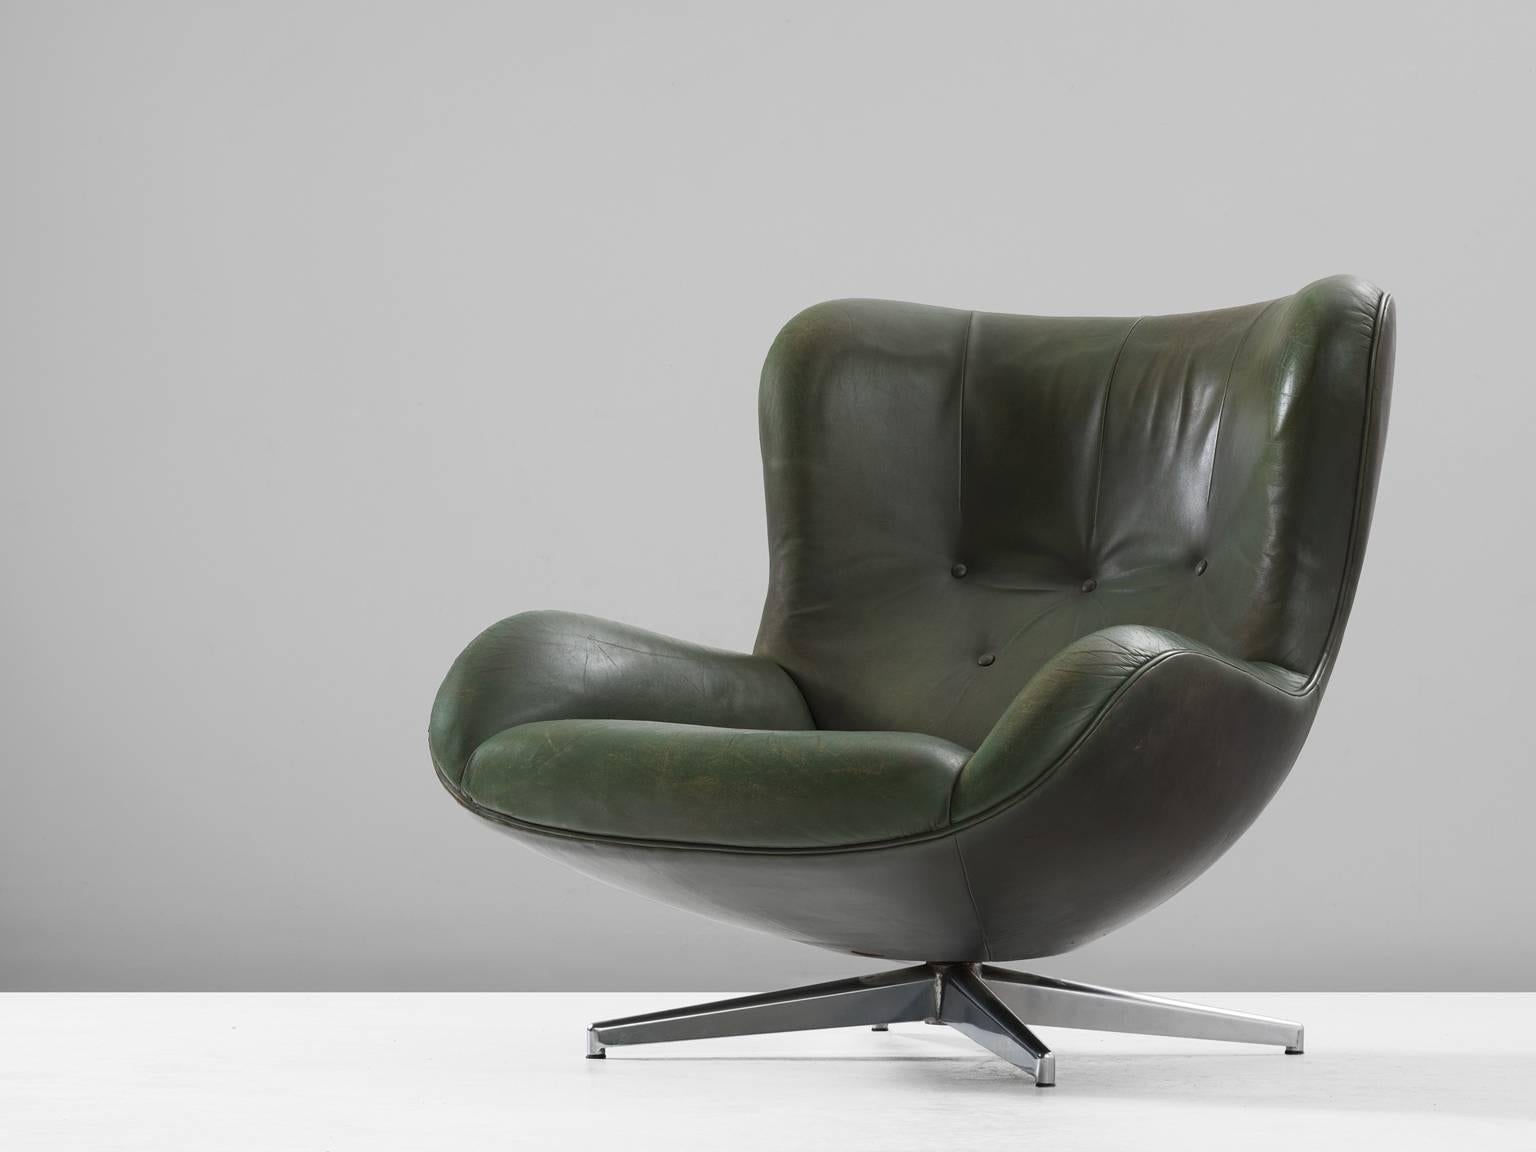 Swivel lounge chair model ML214, in leather and metal, by Illum Wikkelsø, Denmark 1960s.

 Organic shaped easy chair in patinated green leather by Danish designer Illum Wikkelsø. This swivel chair shows some nice contrasts. First the contrasts of